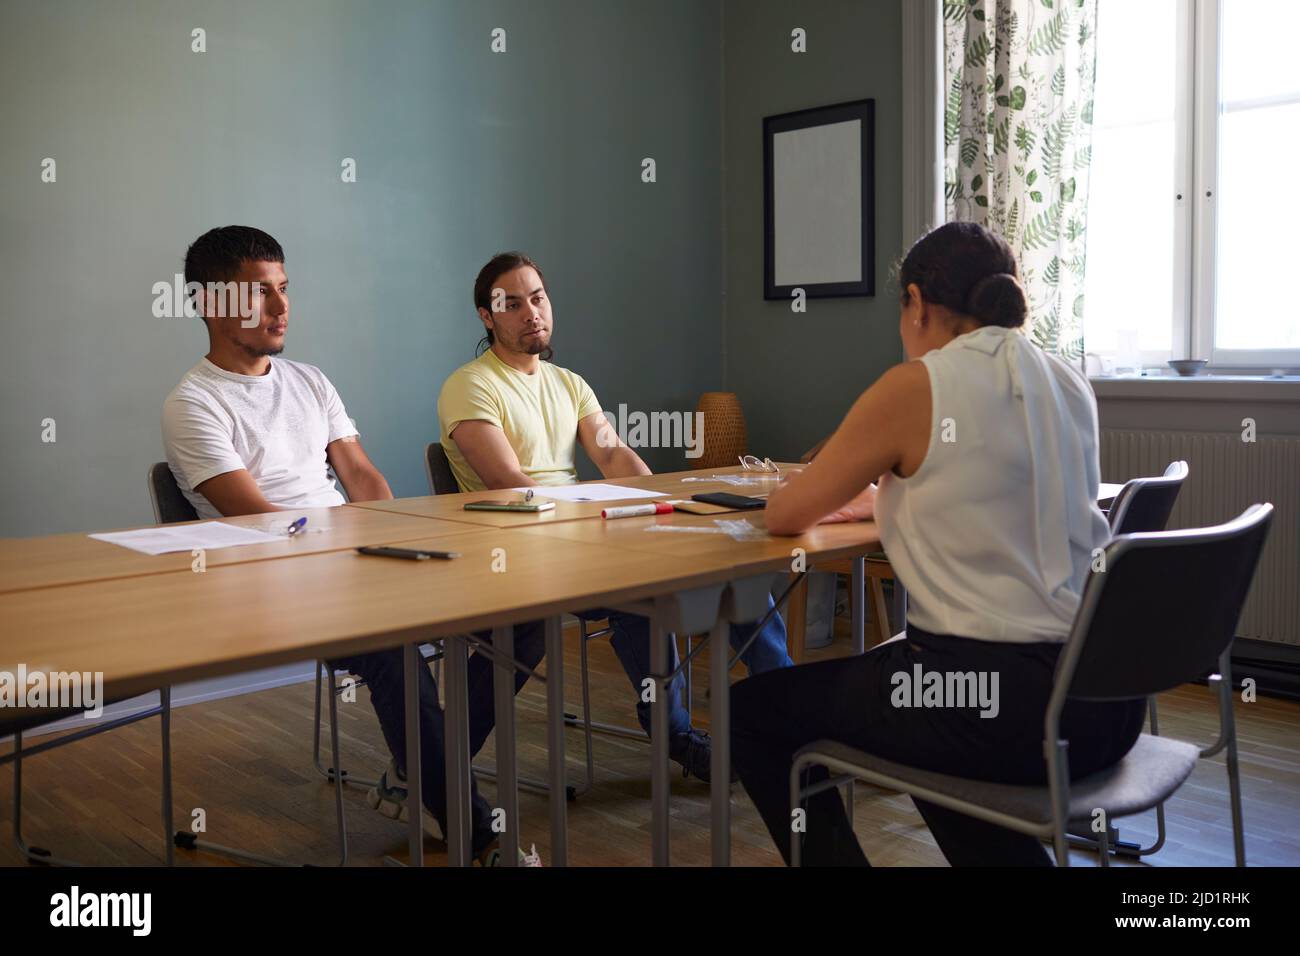 People in boardroom during business meeting Stock Photo